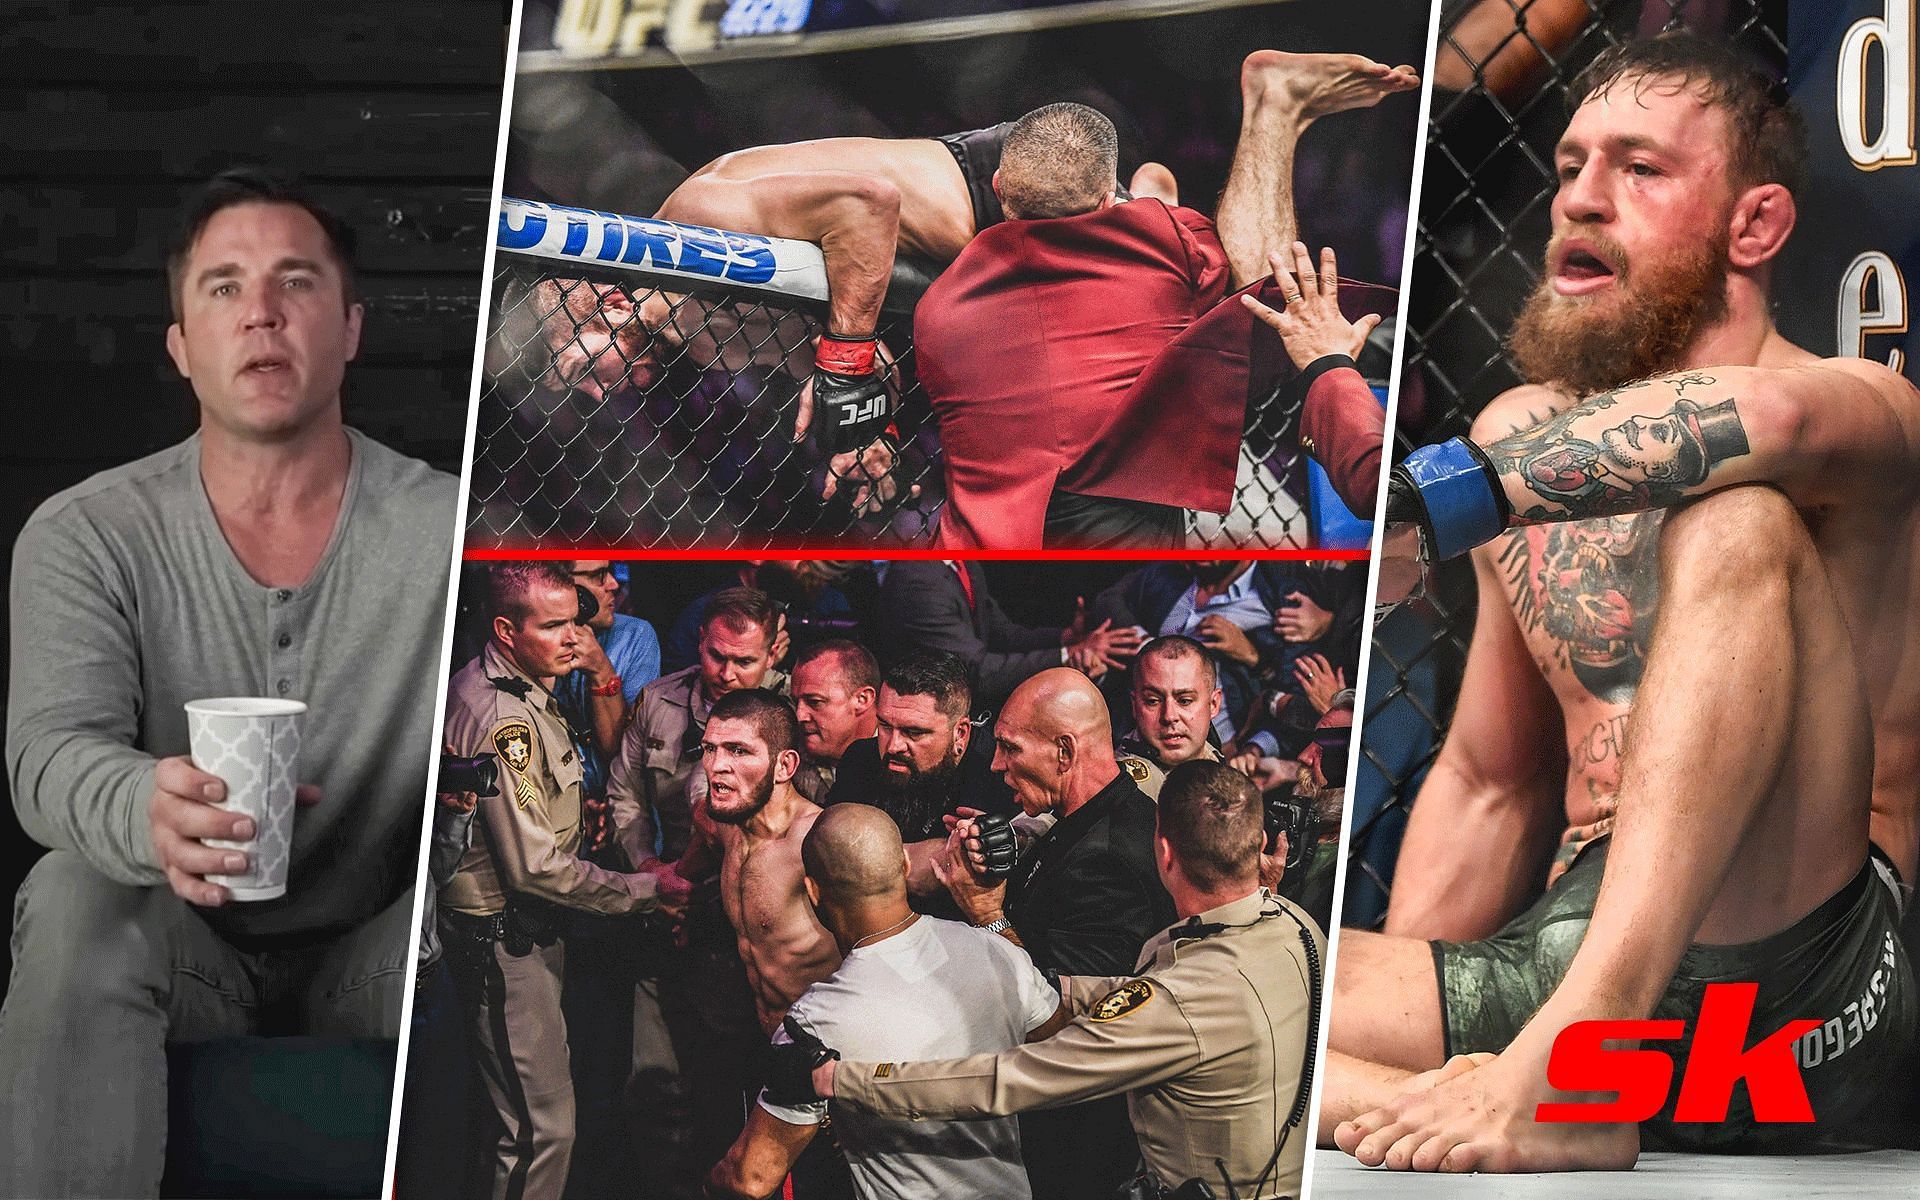 Nevada Commission fined Conor McGregor after UFC 229 to avoid lawsuit, says Chael Sonnen [Images via: Chael Sonnen | YouTube, @Sporf on Twitter]